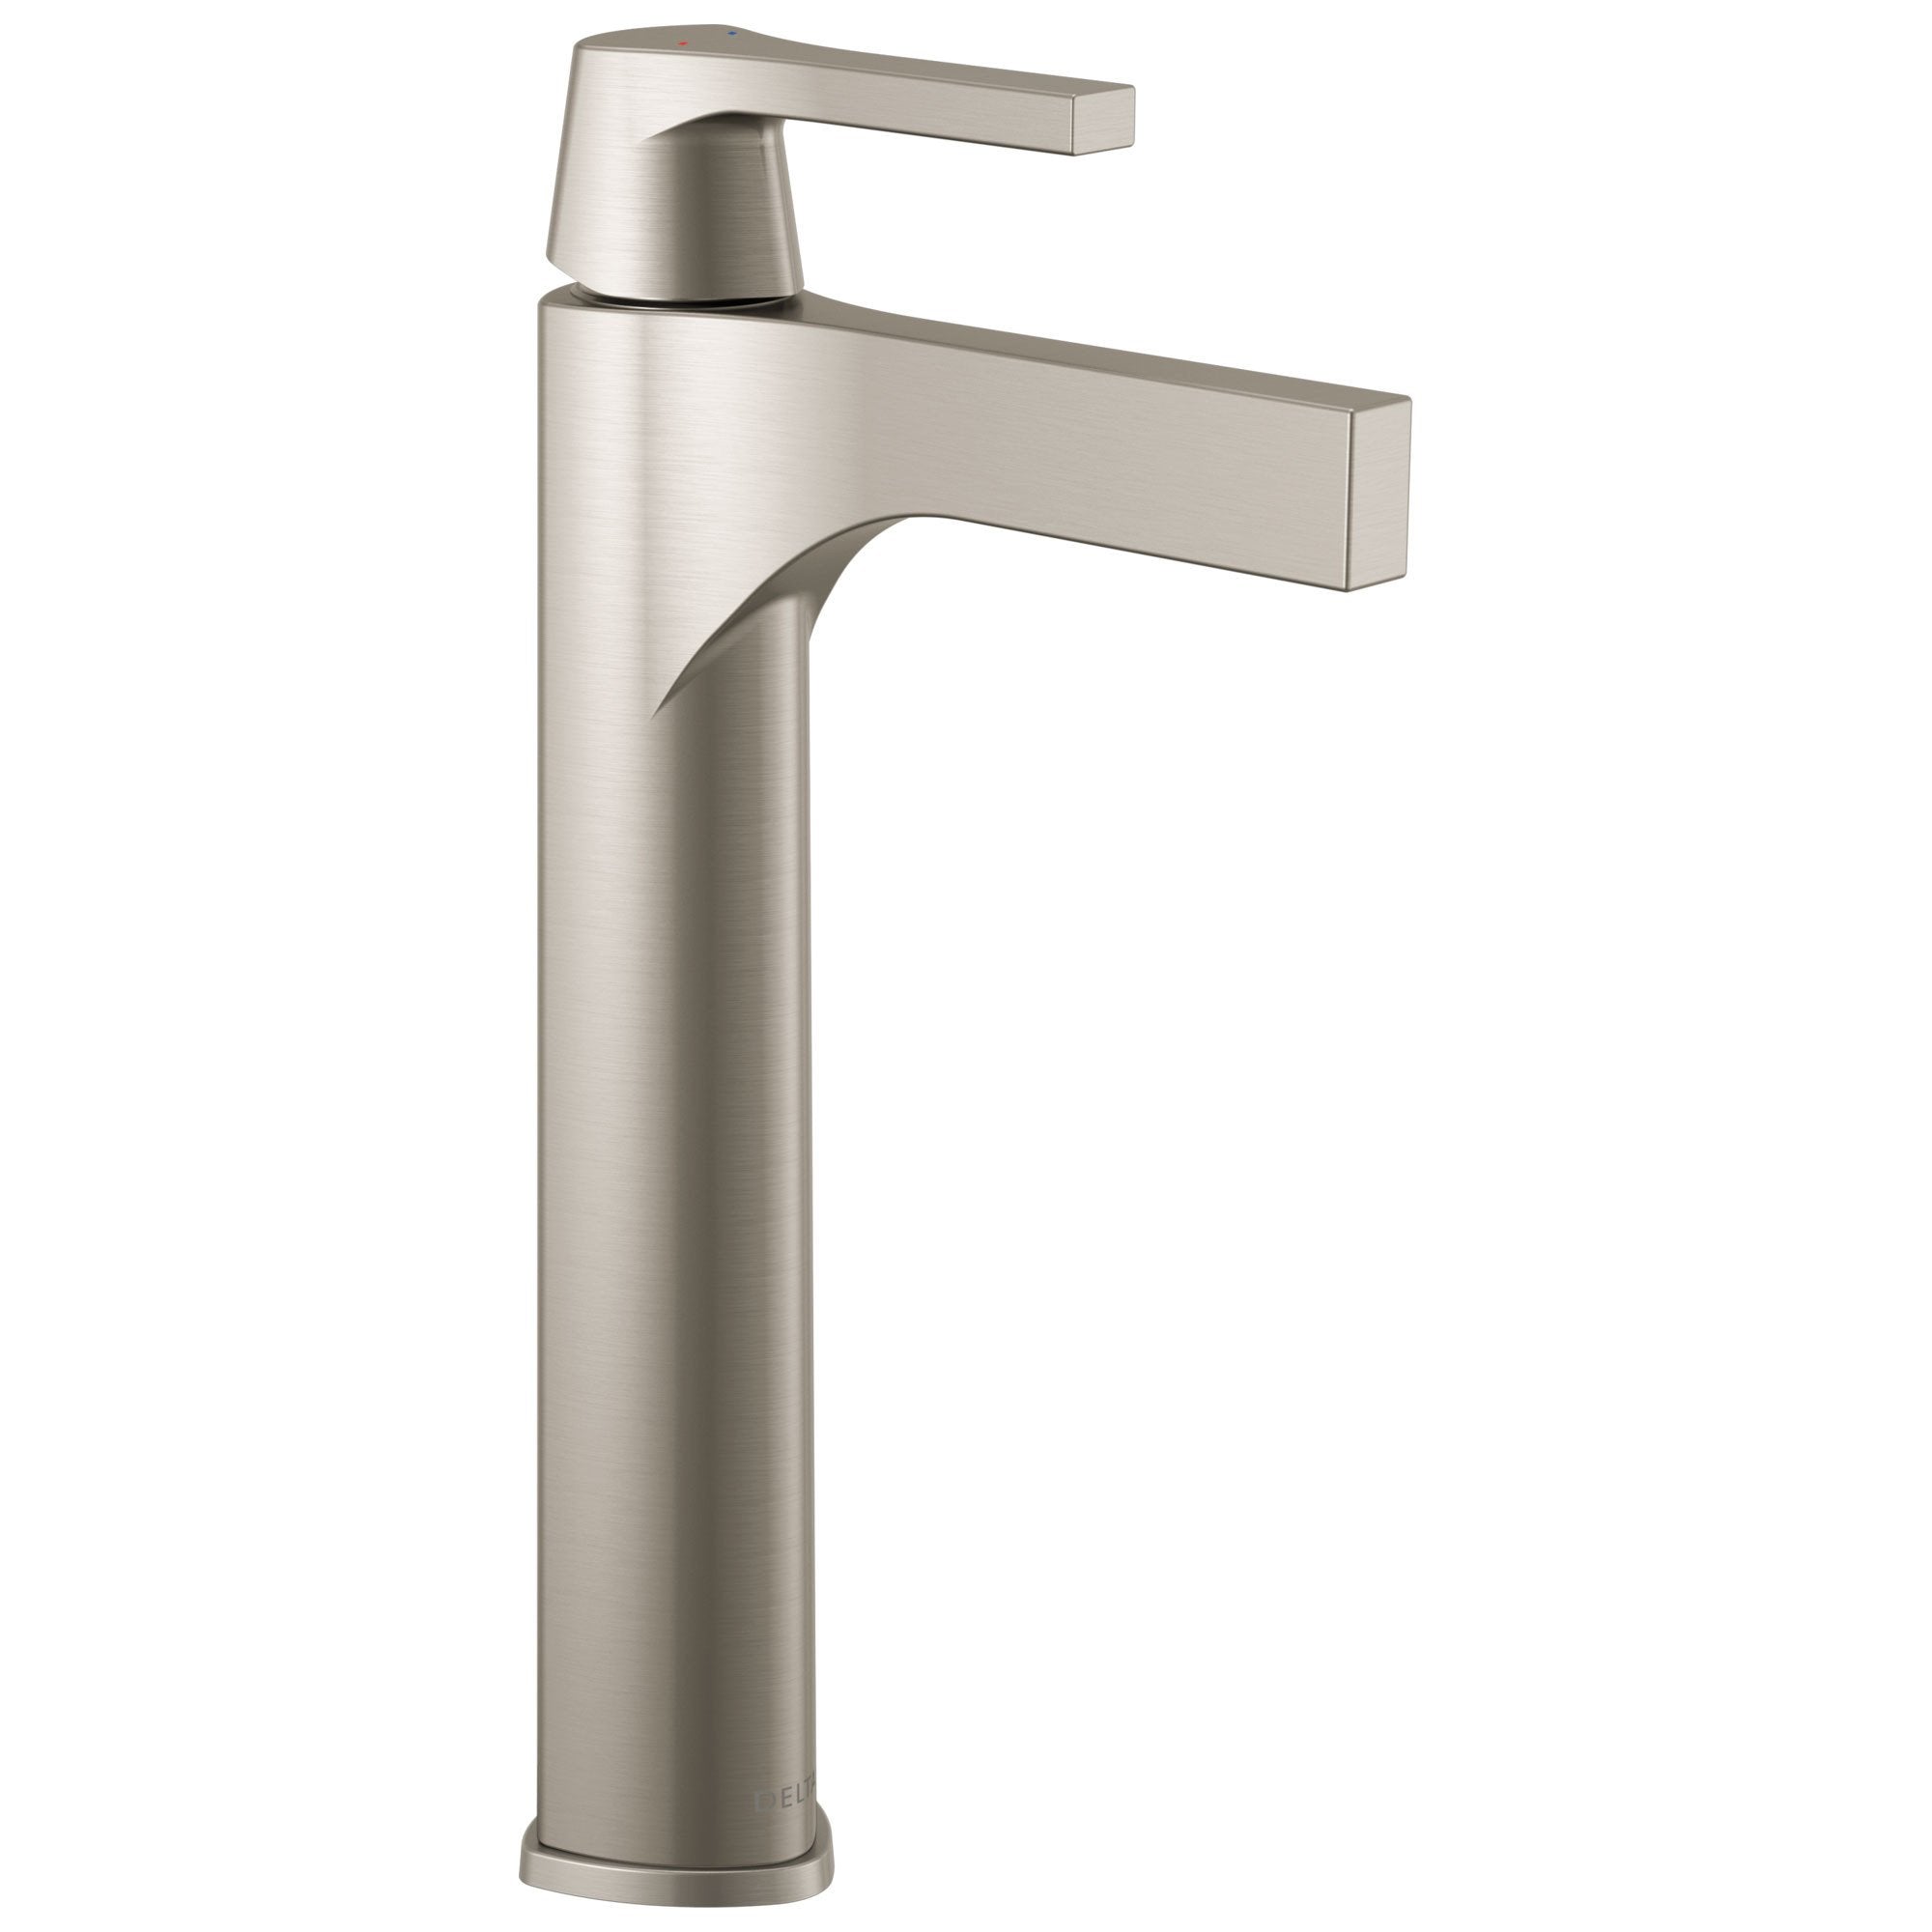 Delta Zura Collection Stainless Steel Finish Single Handle Bathroom Vessel Sink Lavatory Faucet 743906